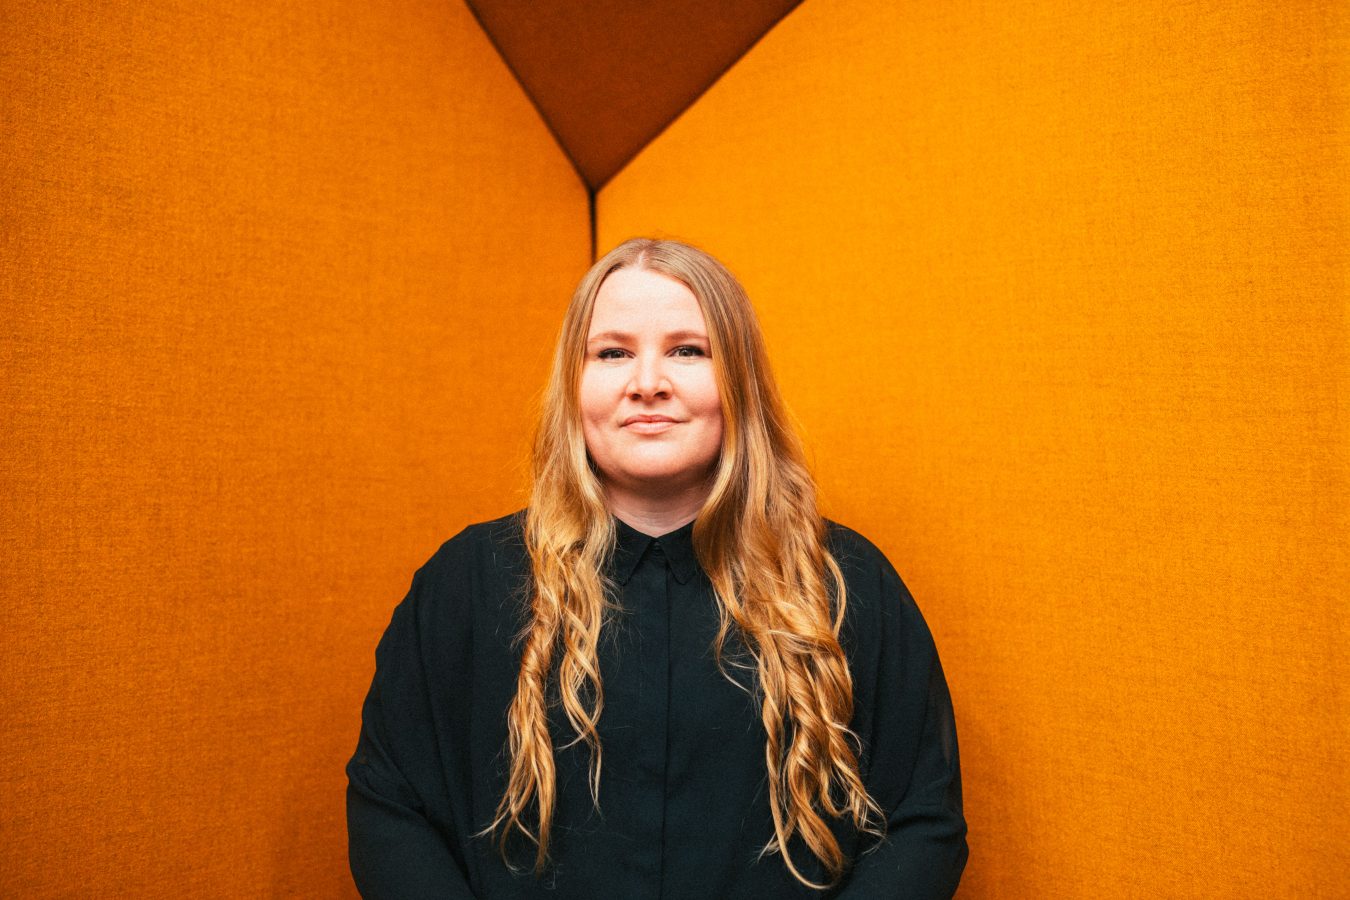 Emily Collins of Music NSW is looking straight at the camera. She is standing against an orange wall.